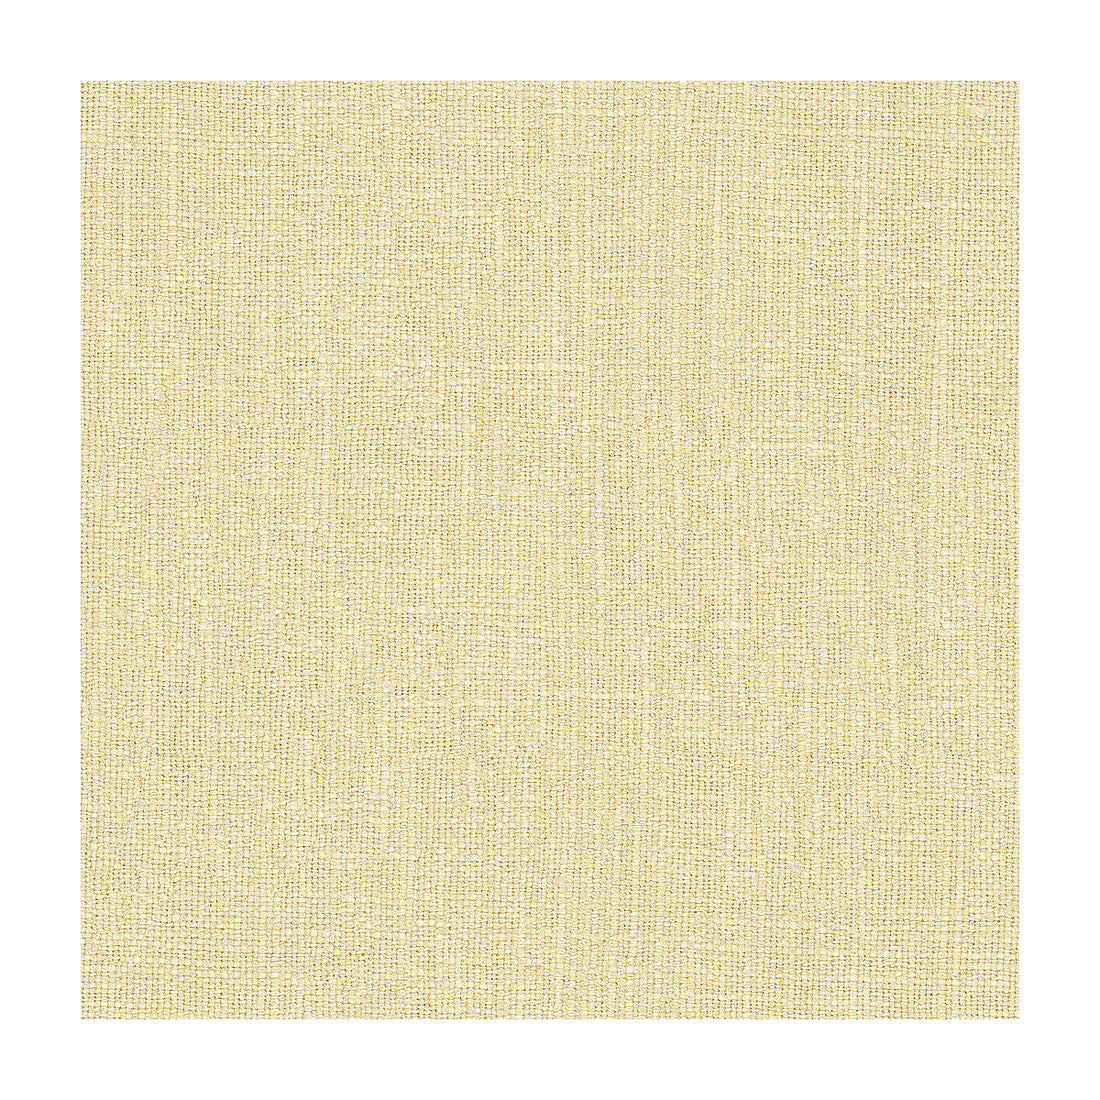 Kravet Basics fabric in 32612-111 color - pattern 32612.111.0 - by Kravet Basics in the Perfect Plains collection